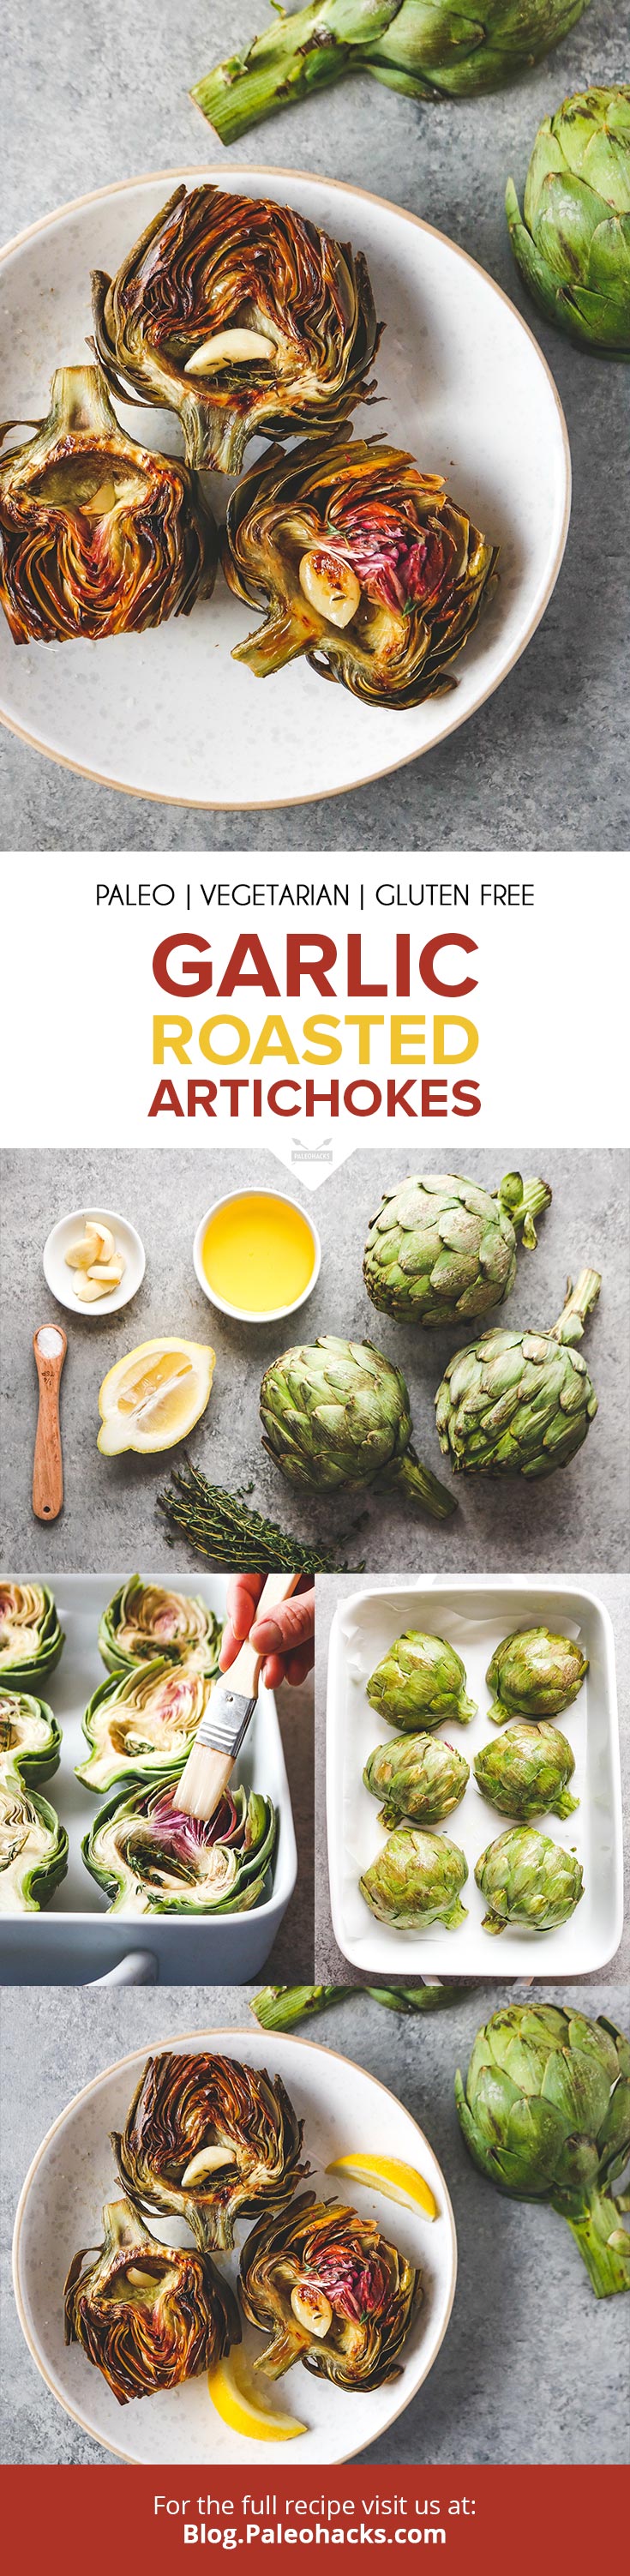 Easily roast up artichokes with melted ghee, lemon, and fresh herbs for a savory 6-ingredient appetizer!